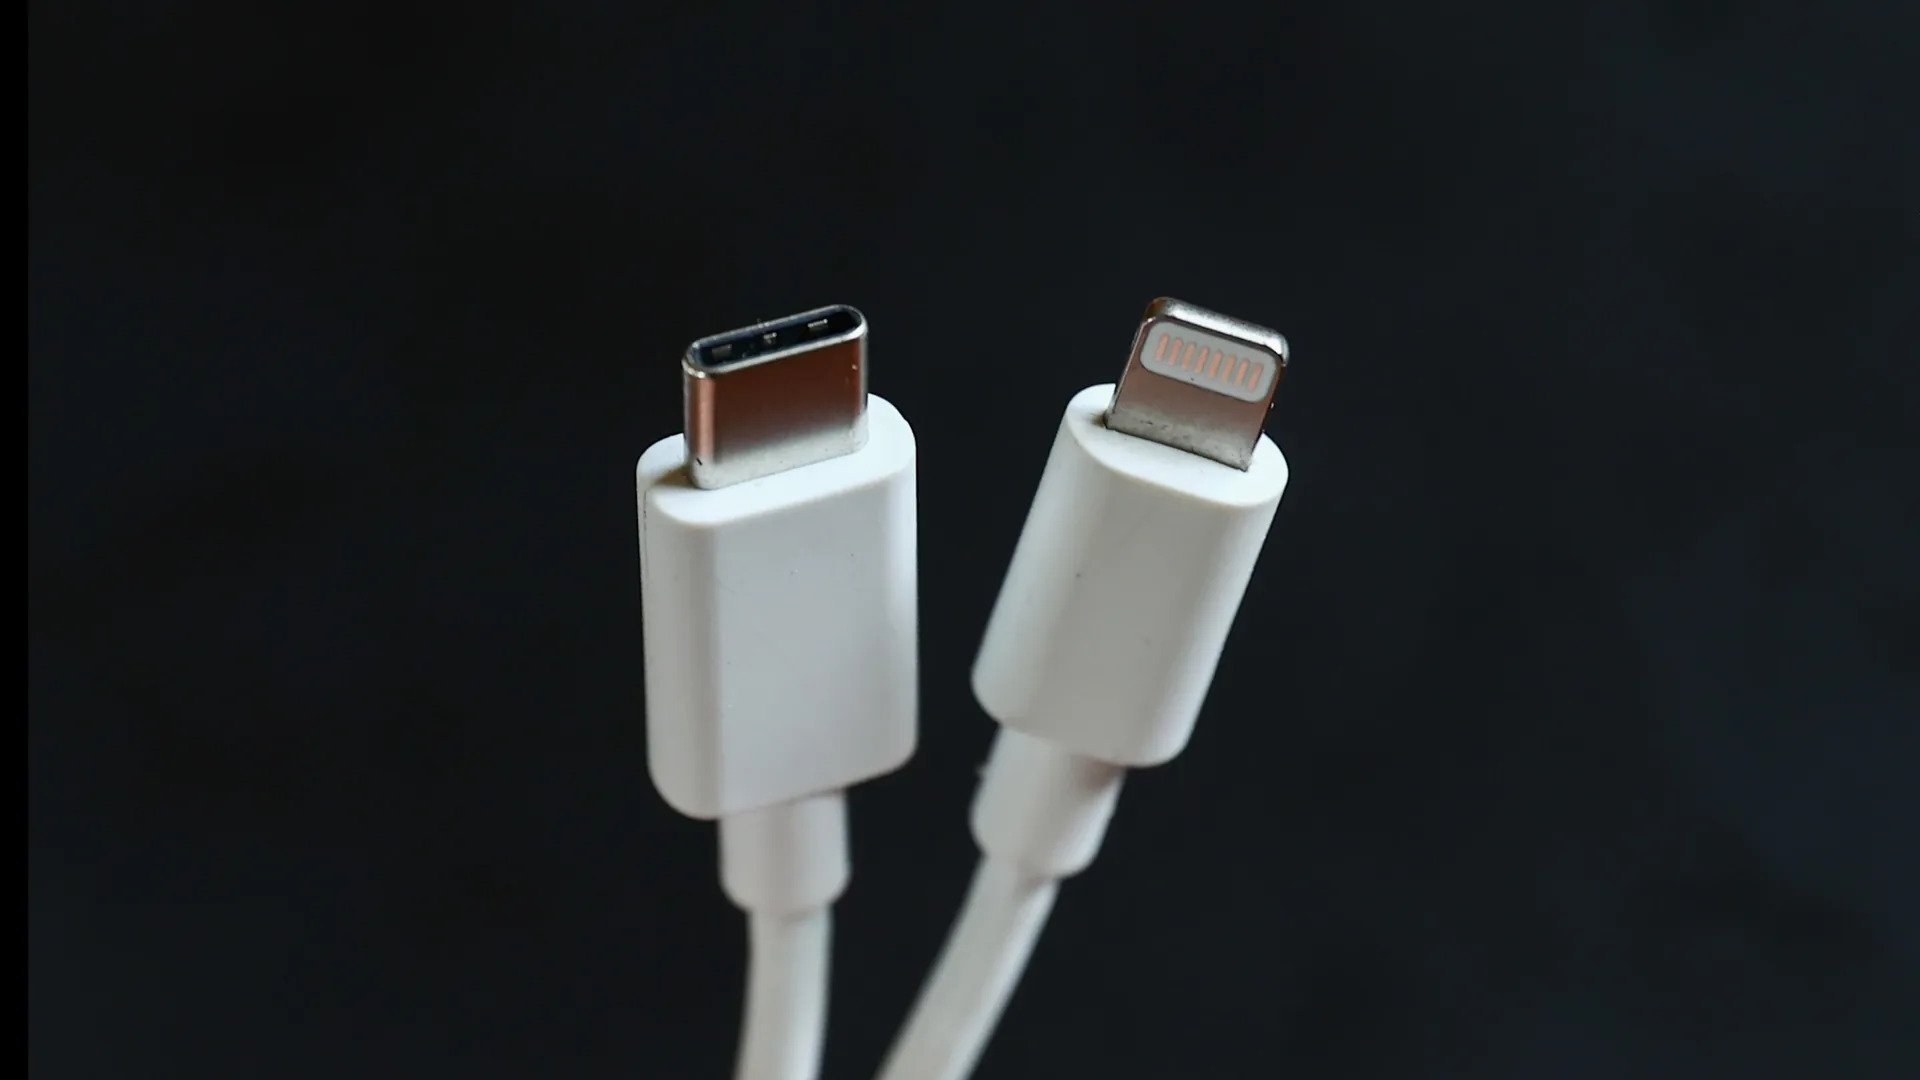 what is usb-c - an image showing a usb-c cable next to a lightning connector